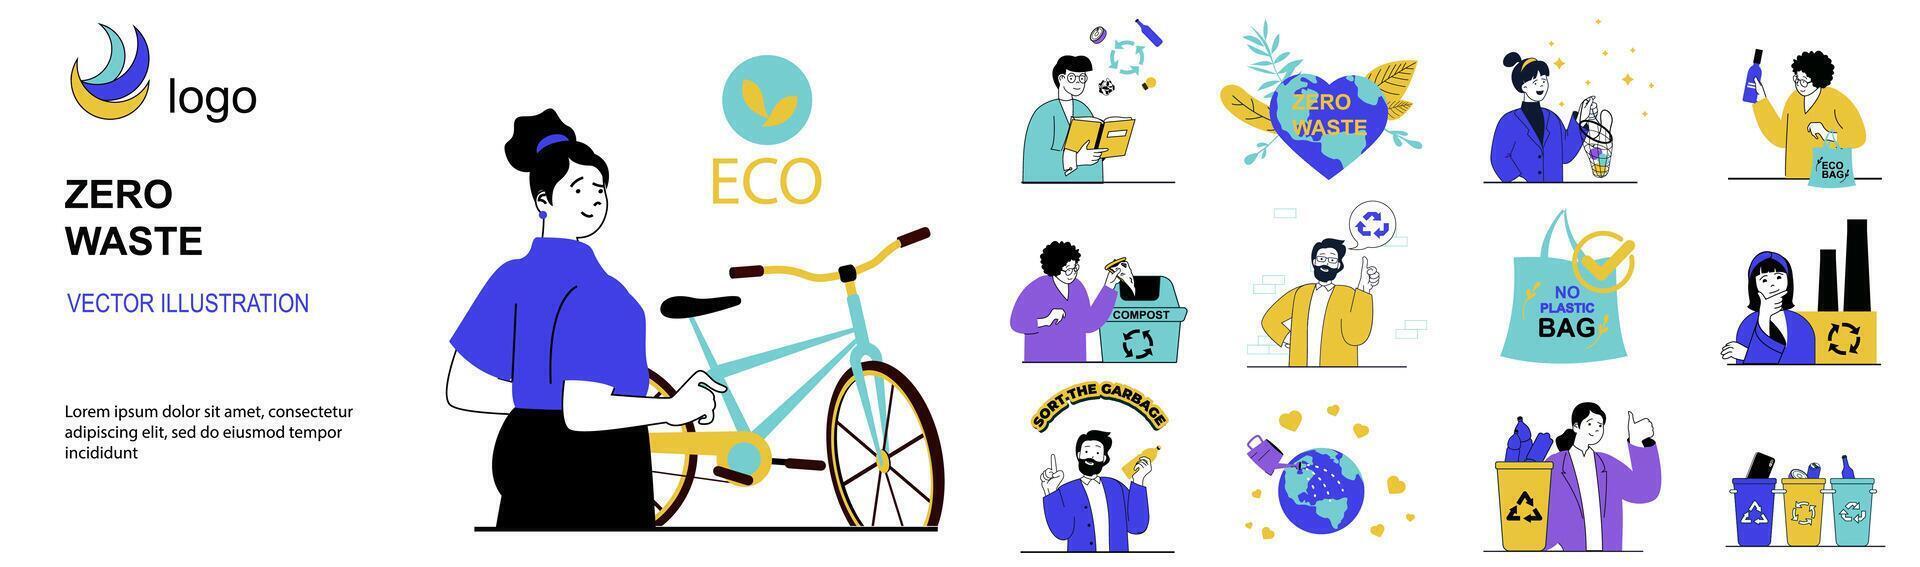 Zero waste concept with character situations collection. Bundle of scenes people recycling waste, using eco bags and bicycle, sorting garbage for reusing. Vector illustrations in flat web design